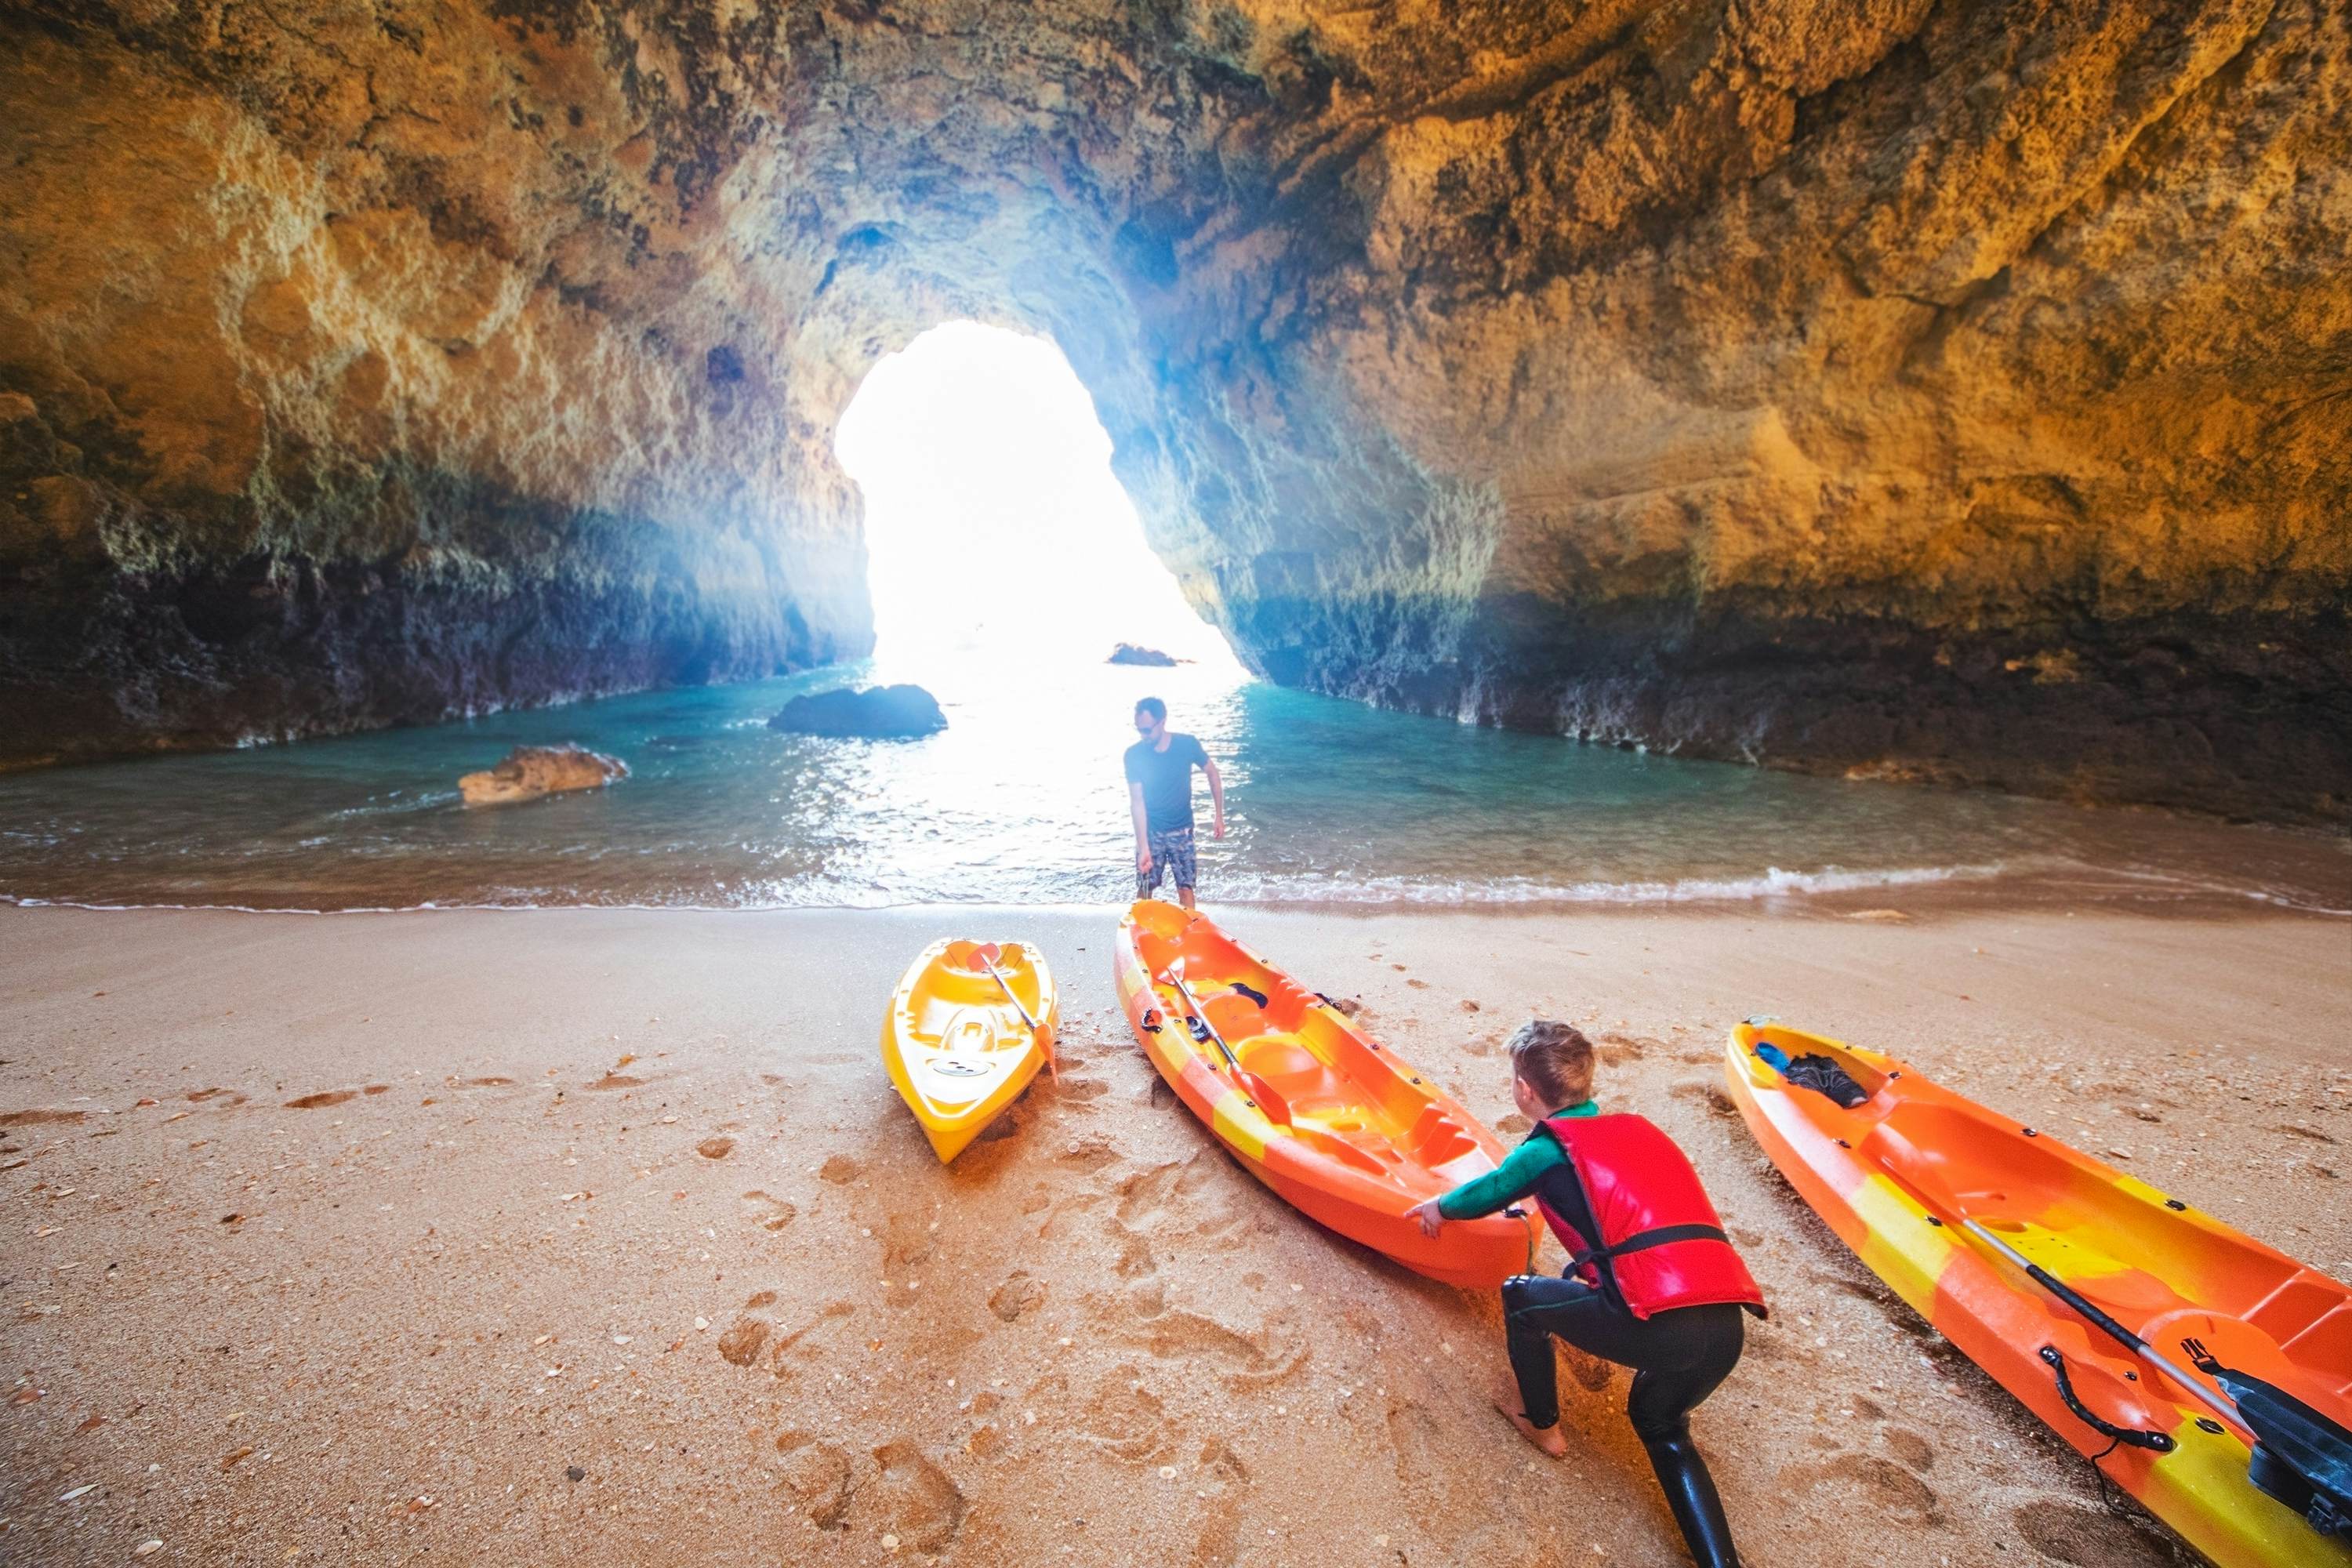 25 Things to Do in The Algarve for an Amazing Trip